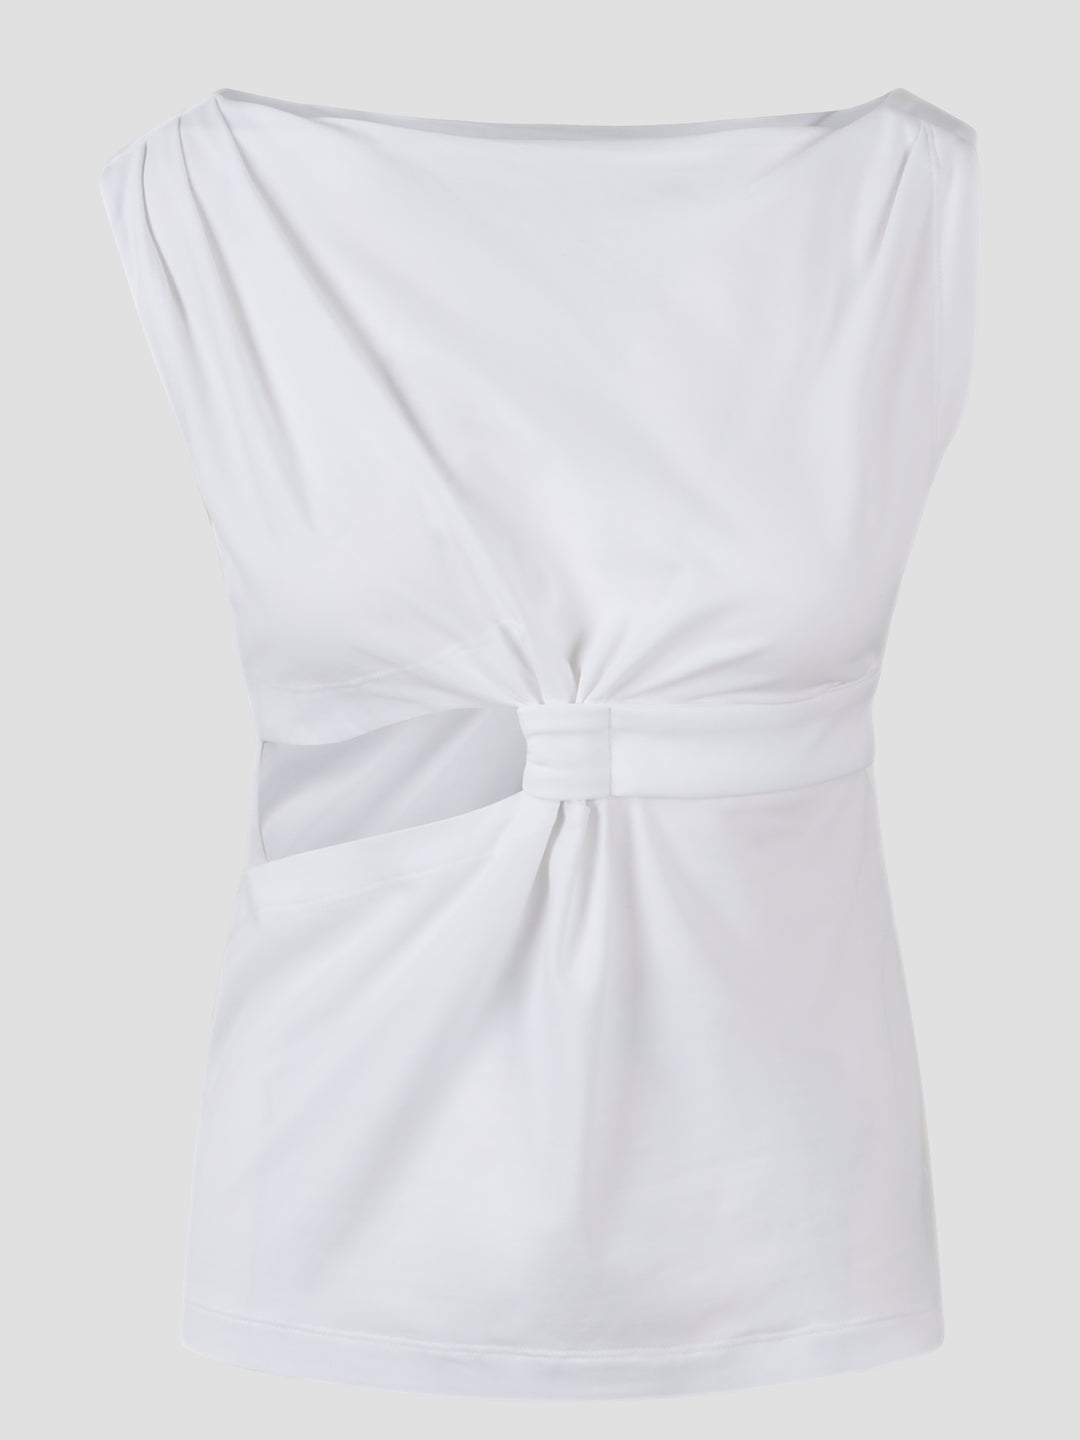 Eco-friendly jersey knot top